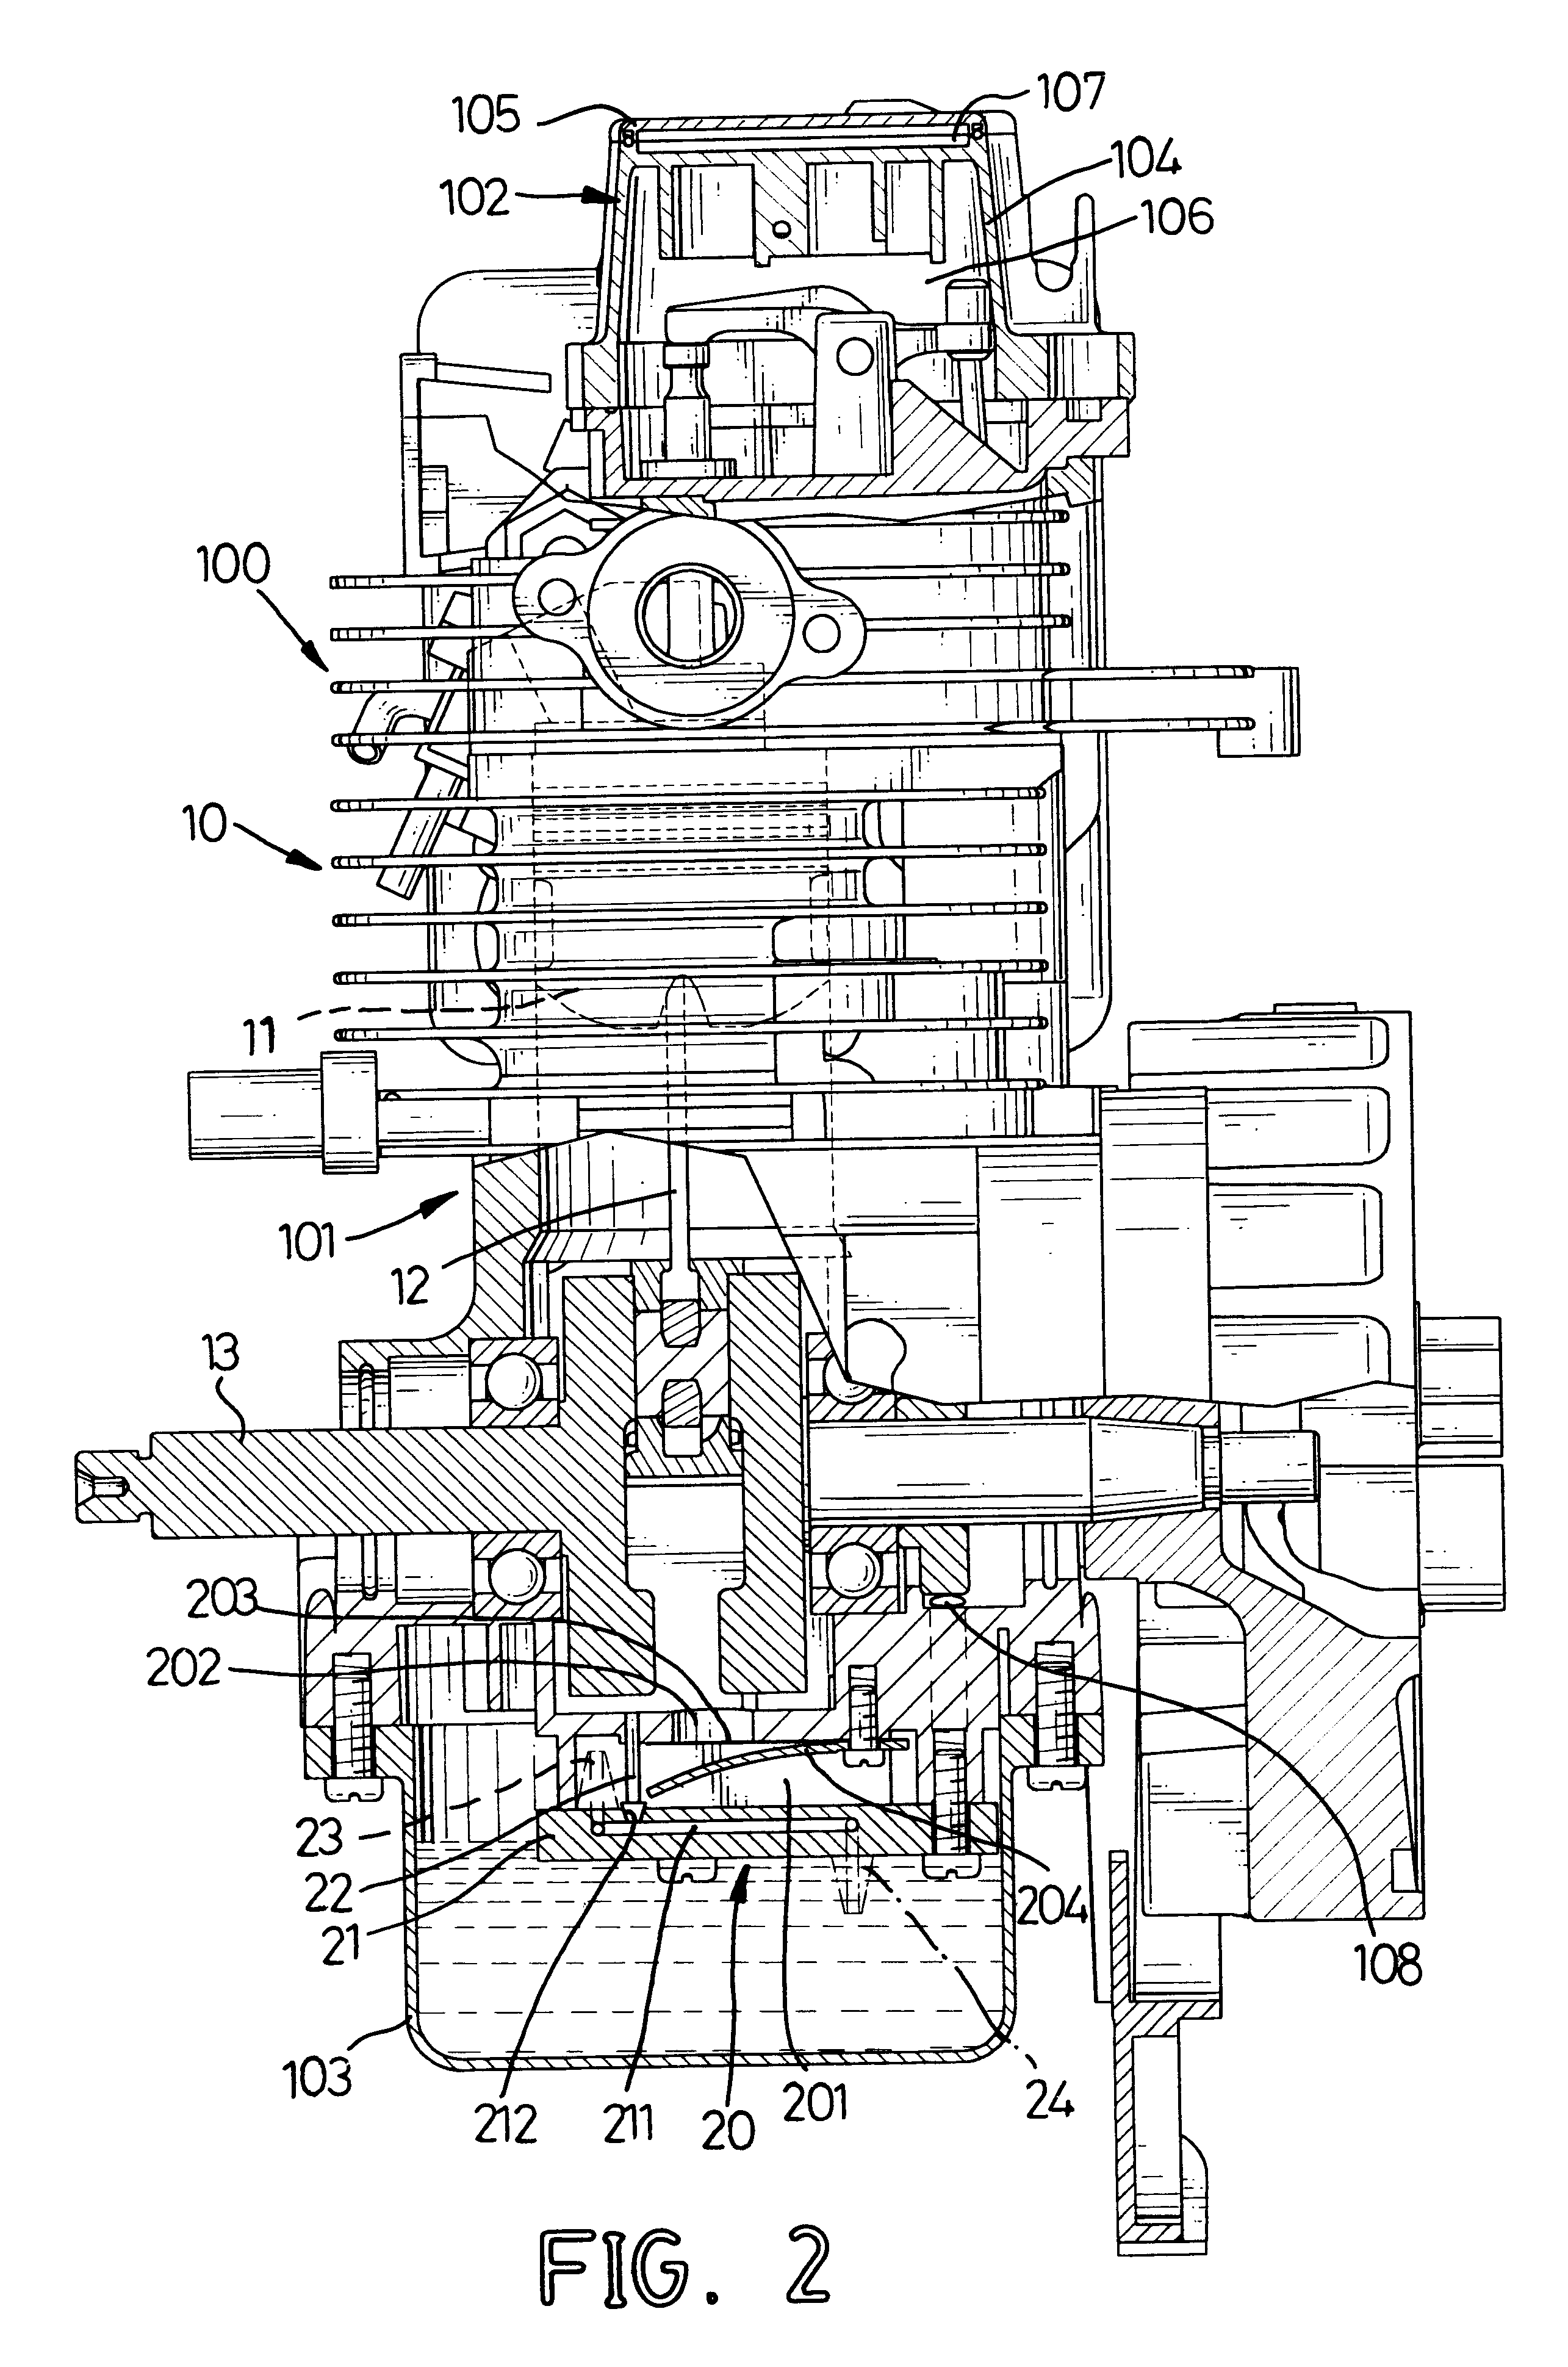 Four-stroke engine with an oil spray generating assembly for lubrication